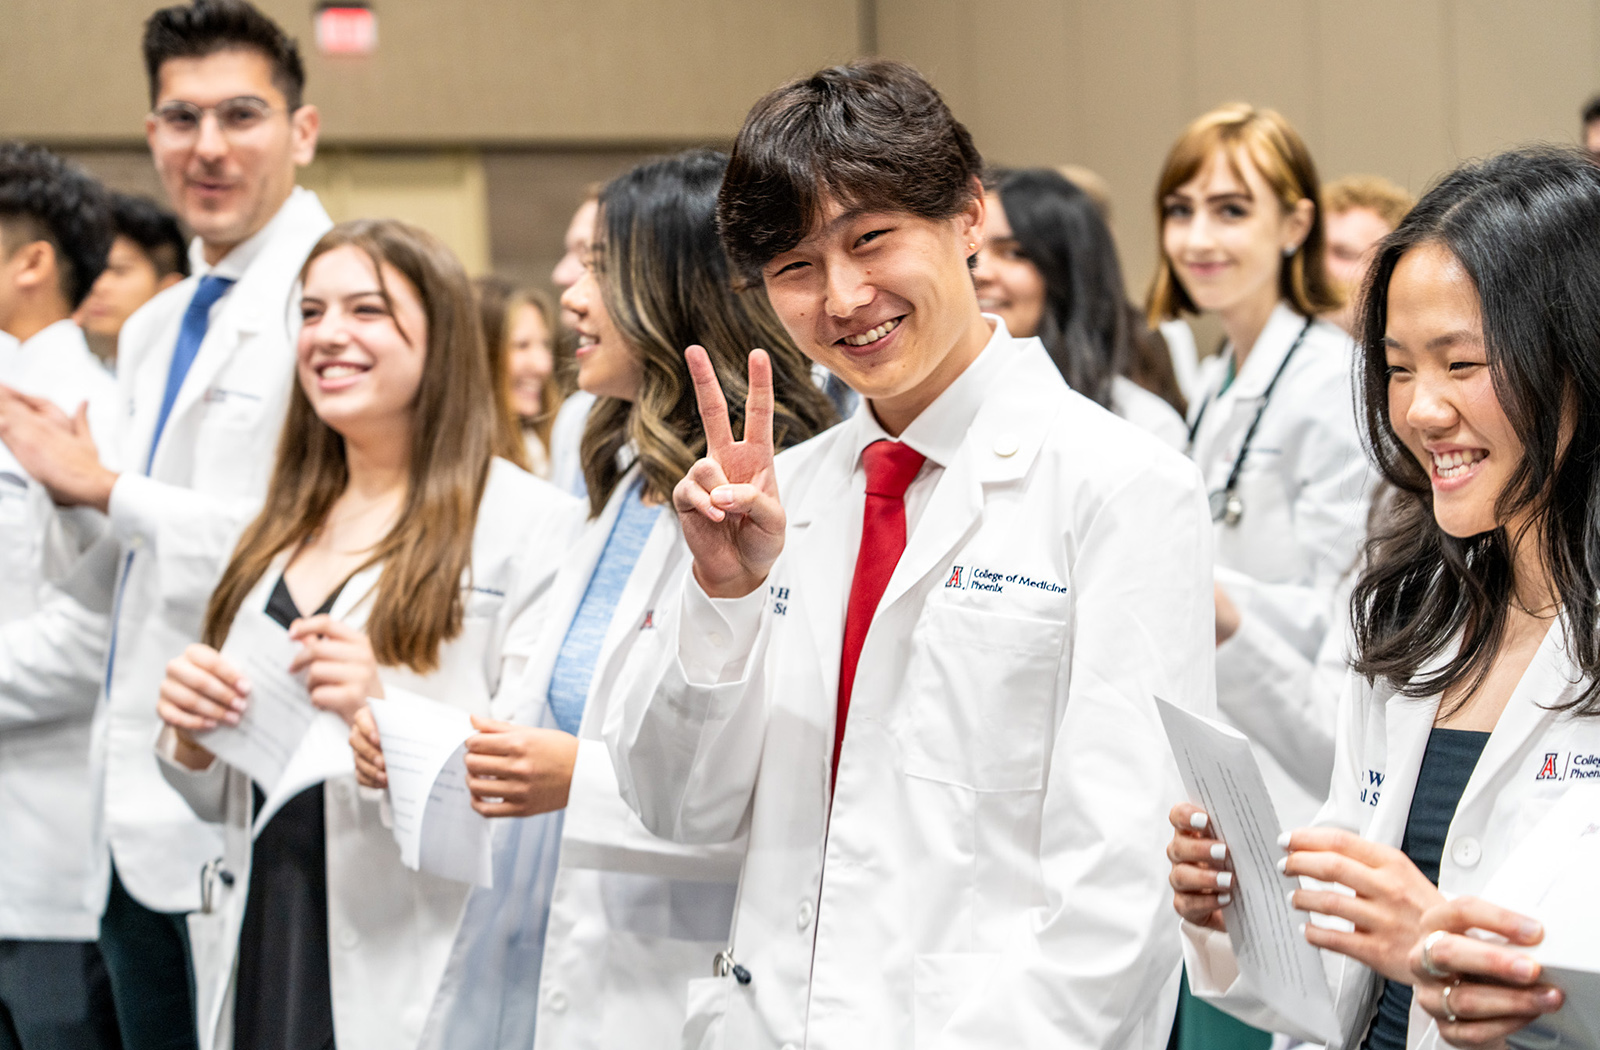 The Class of 2028 at their White Coat Ceremony